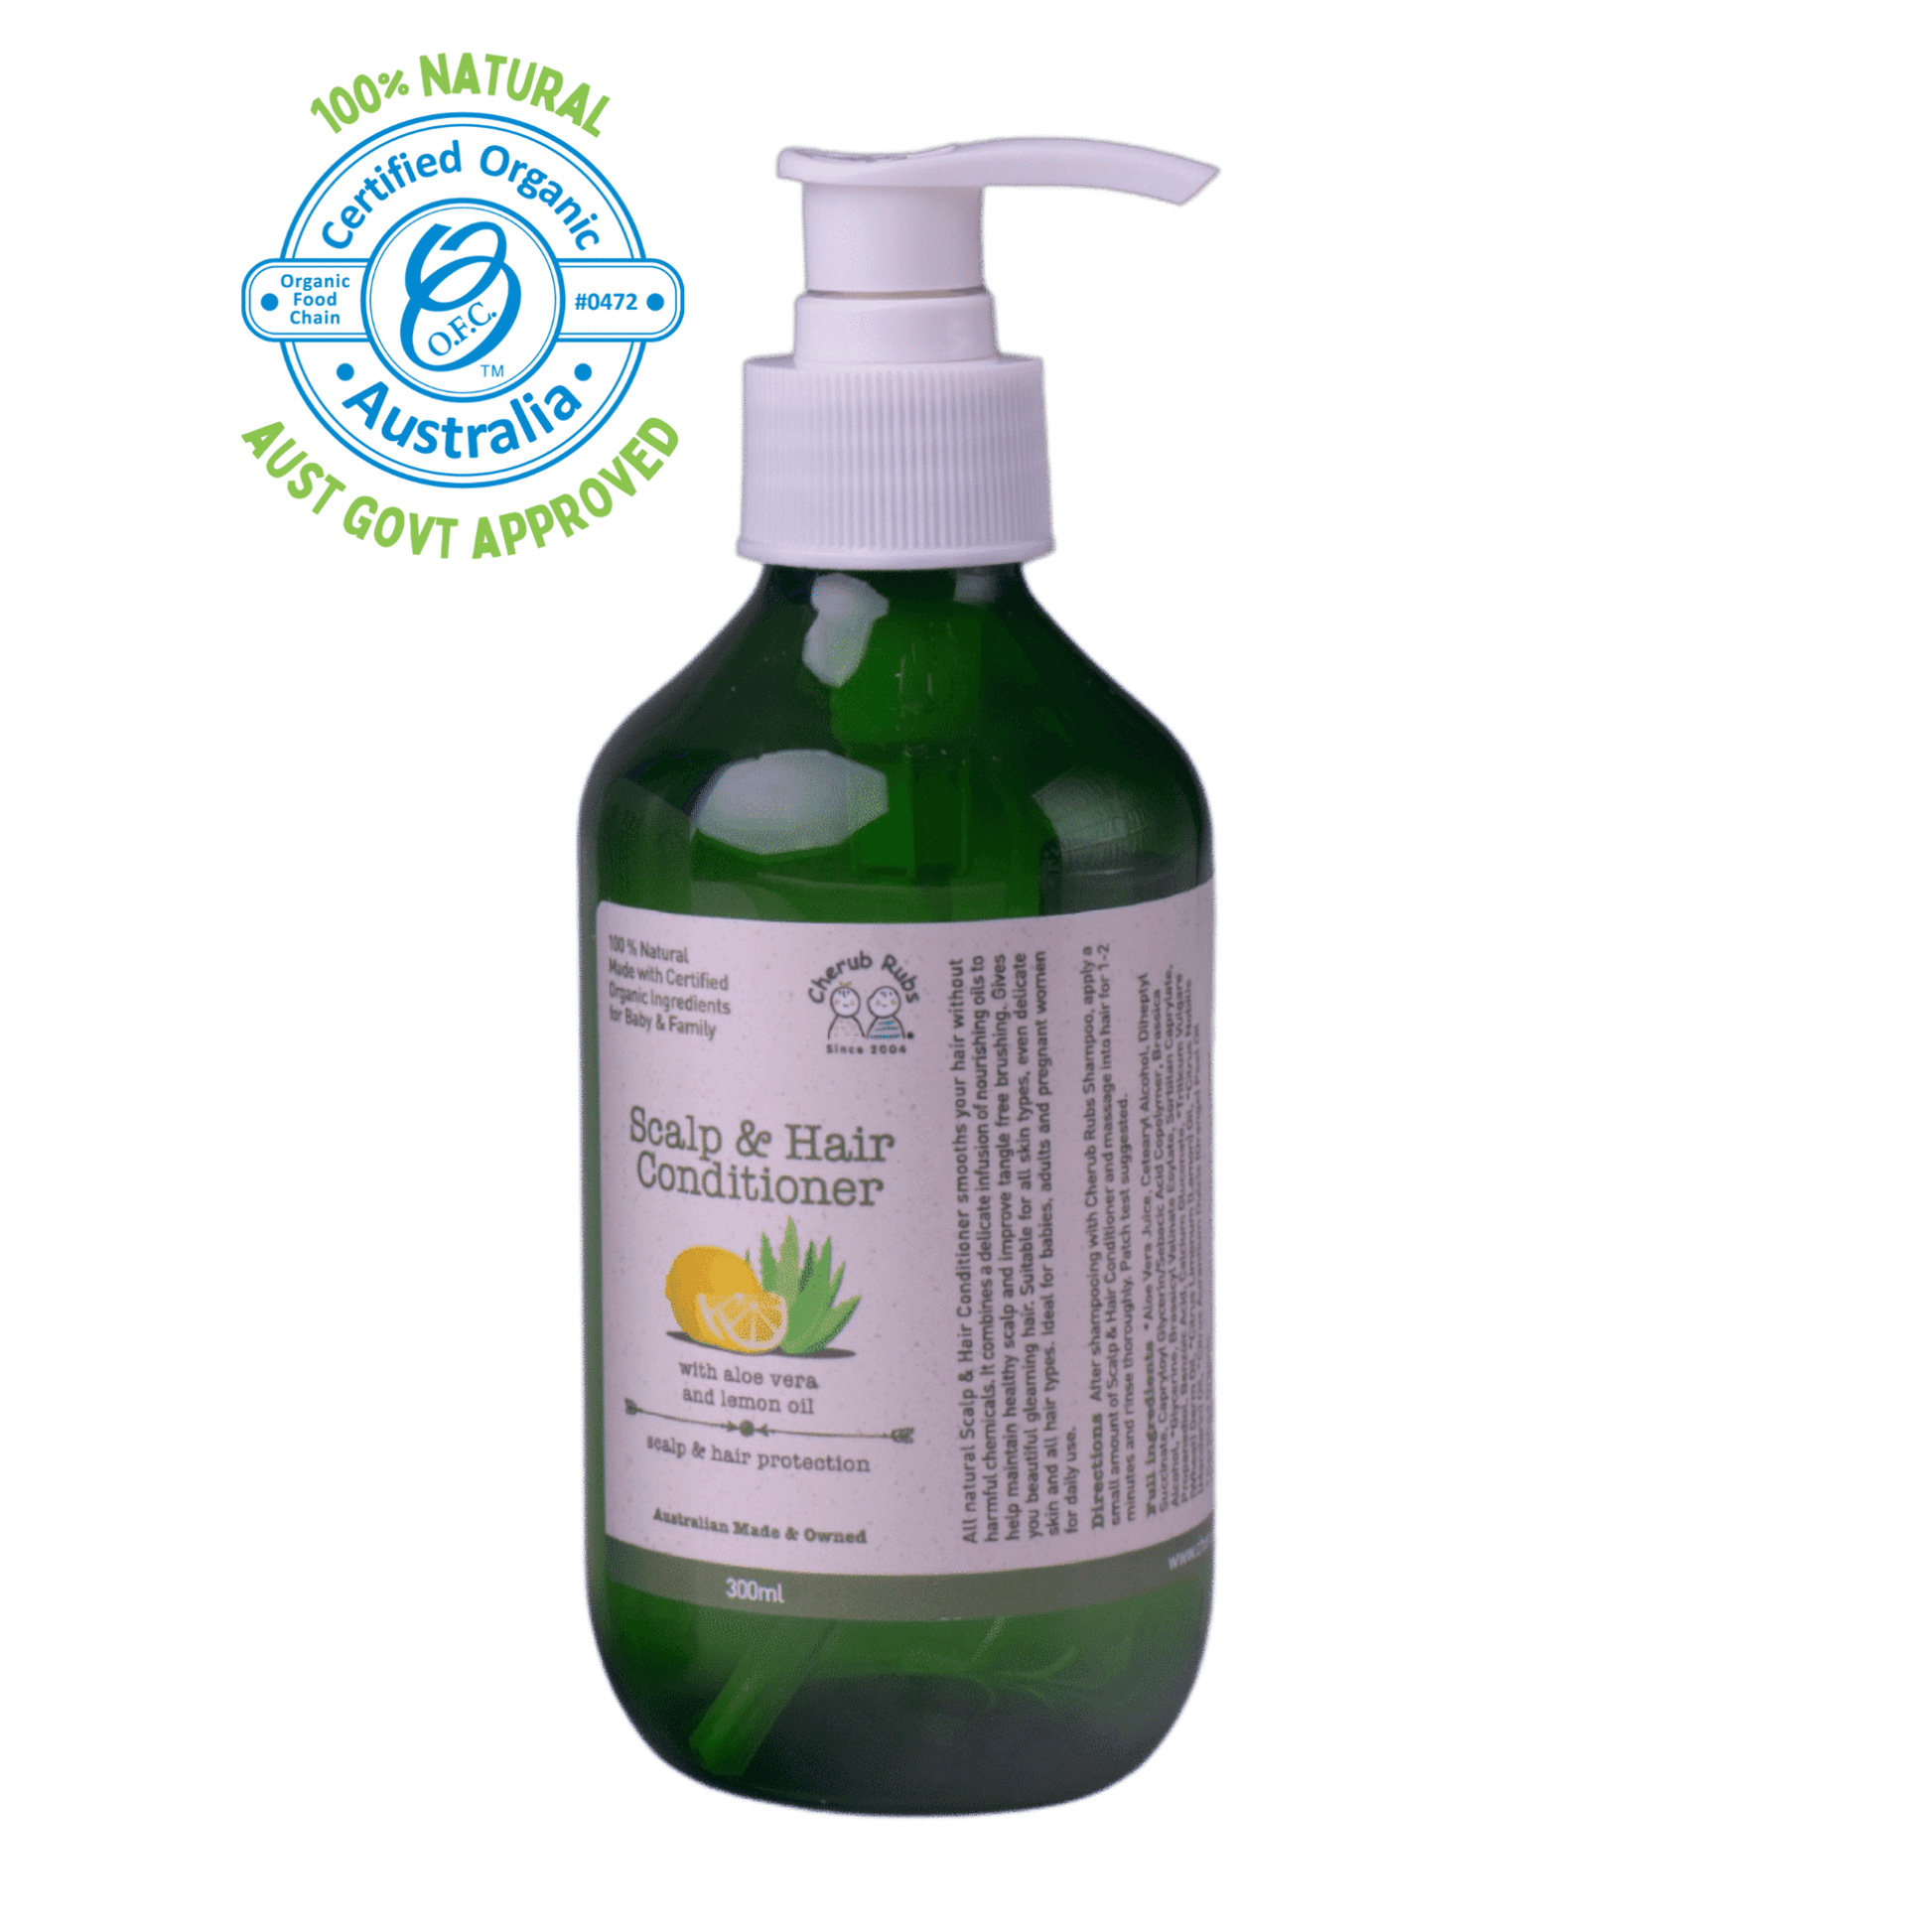 Organic Skincare For Baby & Family by Cherub Rubs.Scalp and hair conditioner 300ml.